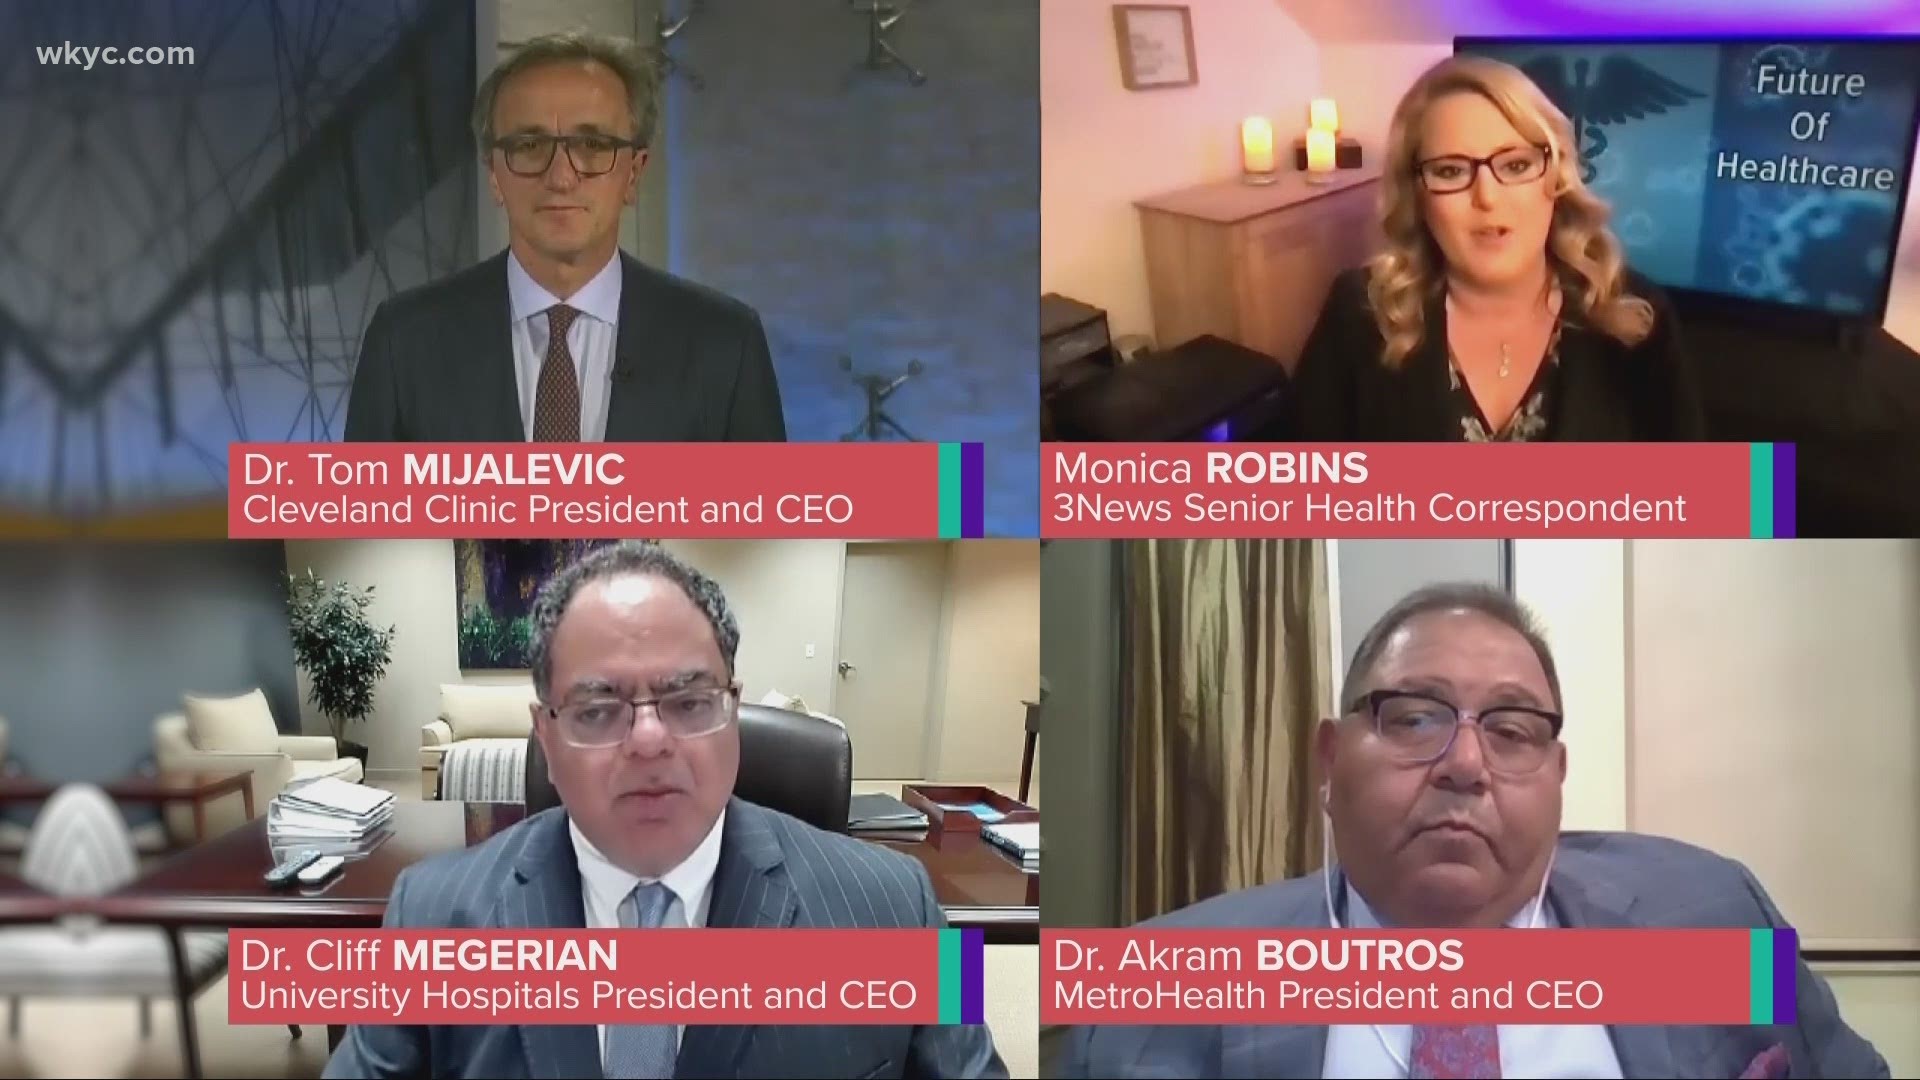 Feb. 22, 2021: 3News' Senior Health Correspondent Monica Robins hosts a COVID-19 roundtable with Cleveland's hospital system CEOs for their thoughts on the pandemic.